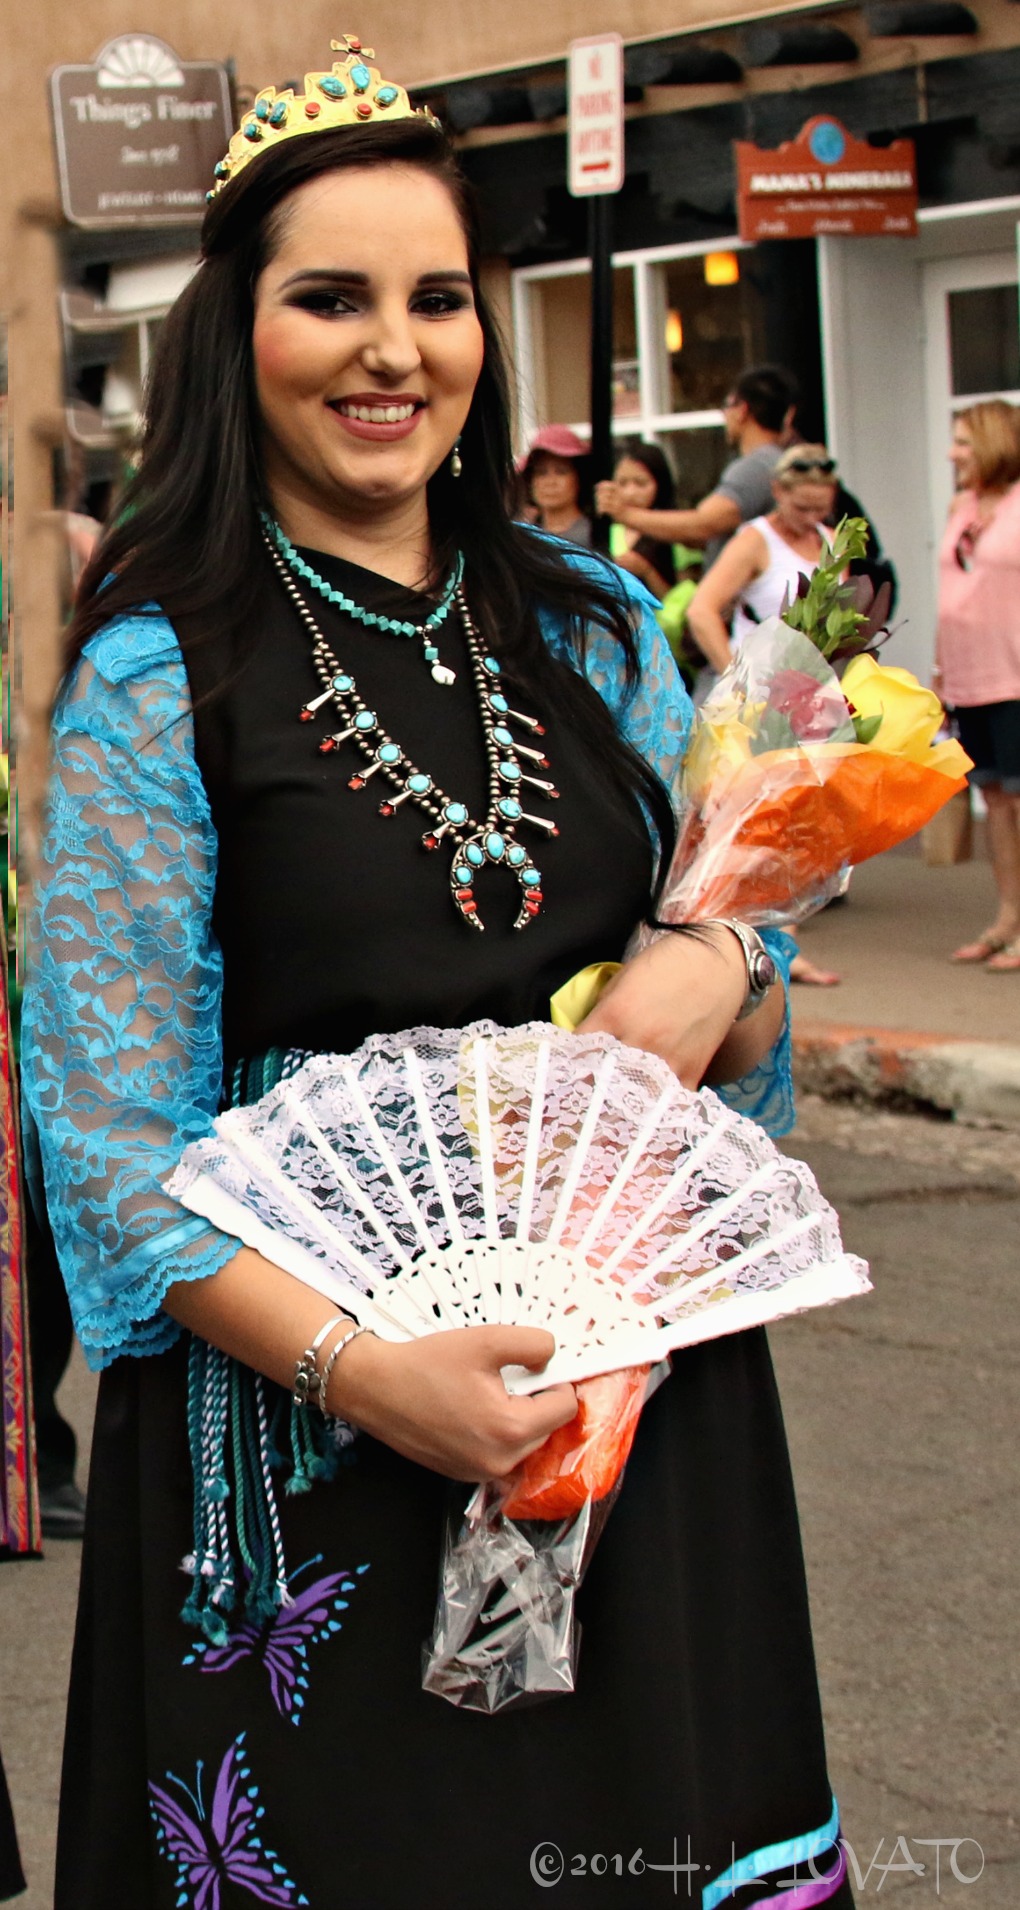 Woman dressed in traditional attire holding a lace fan